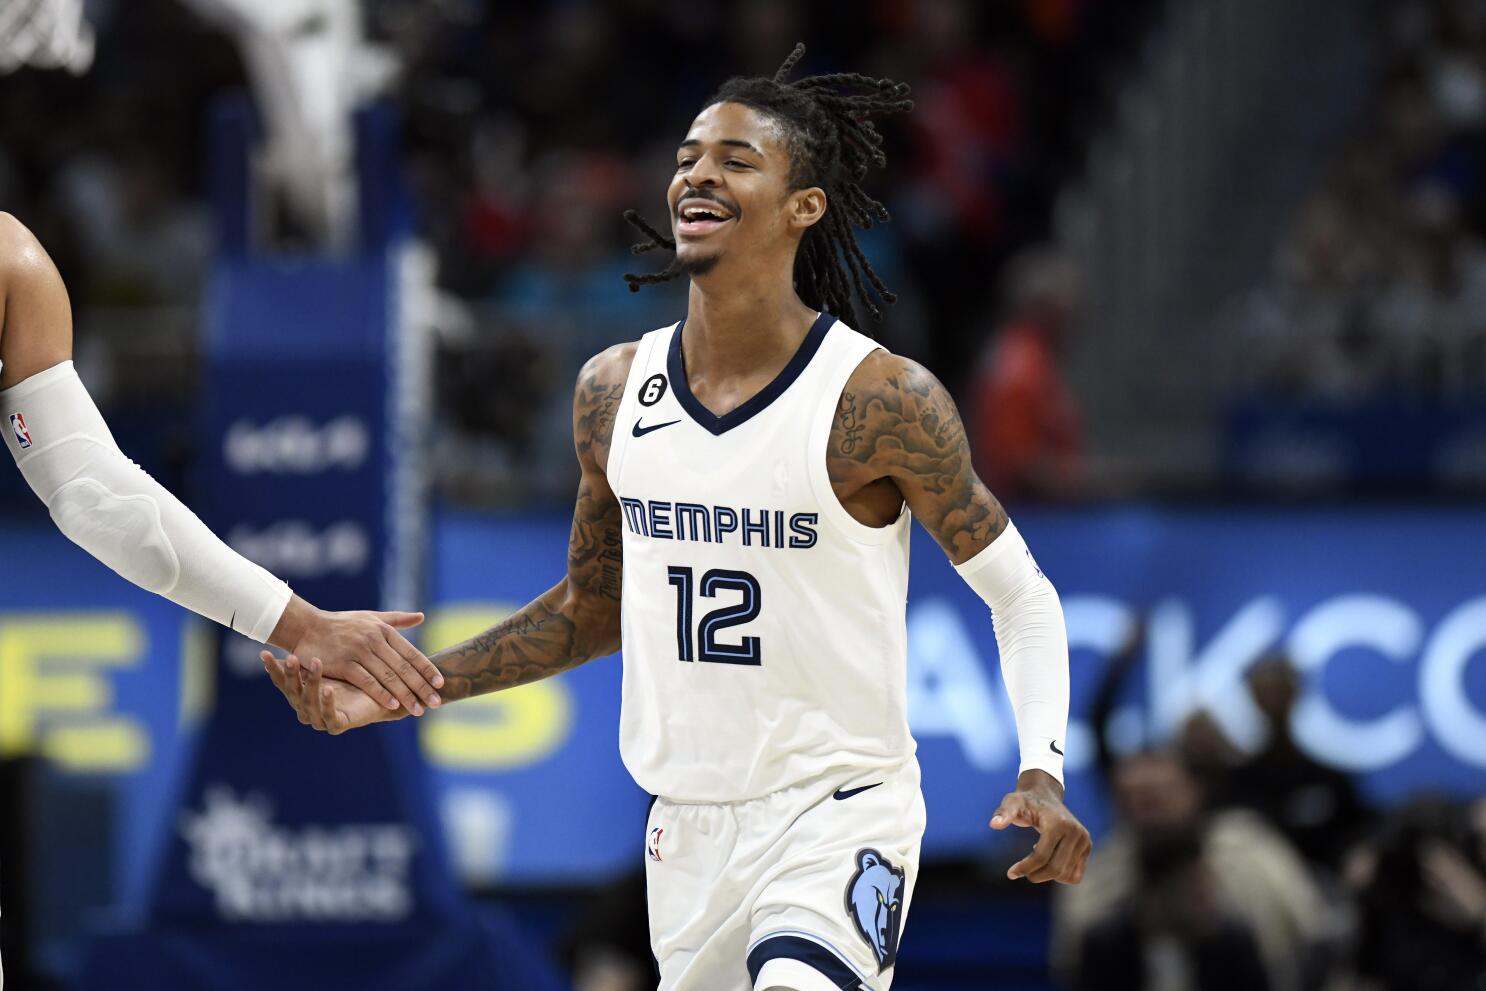 Have you copped a Ja Morant jersey? - Memphis Grizzlies